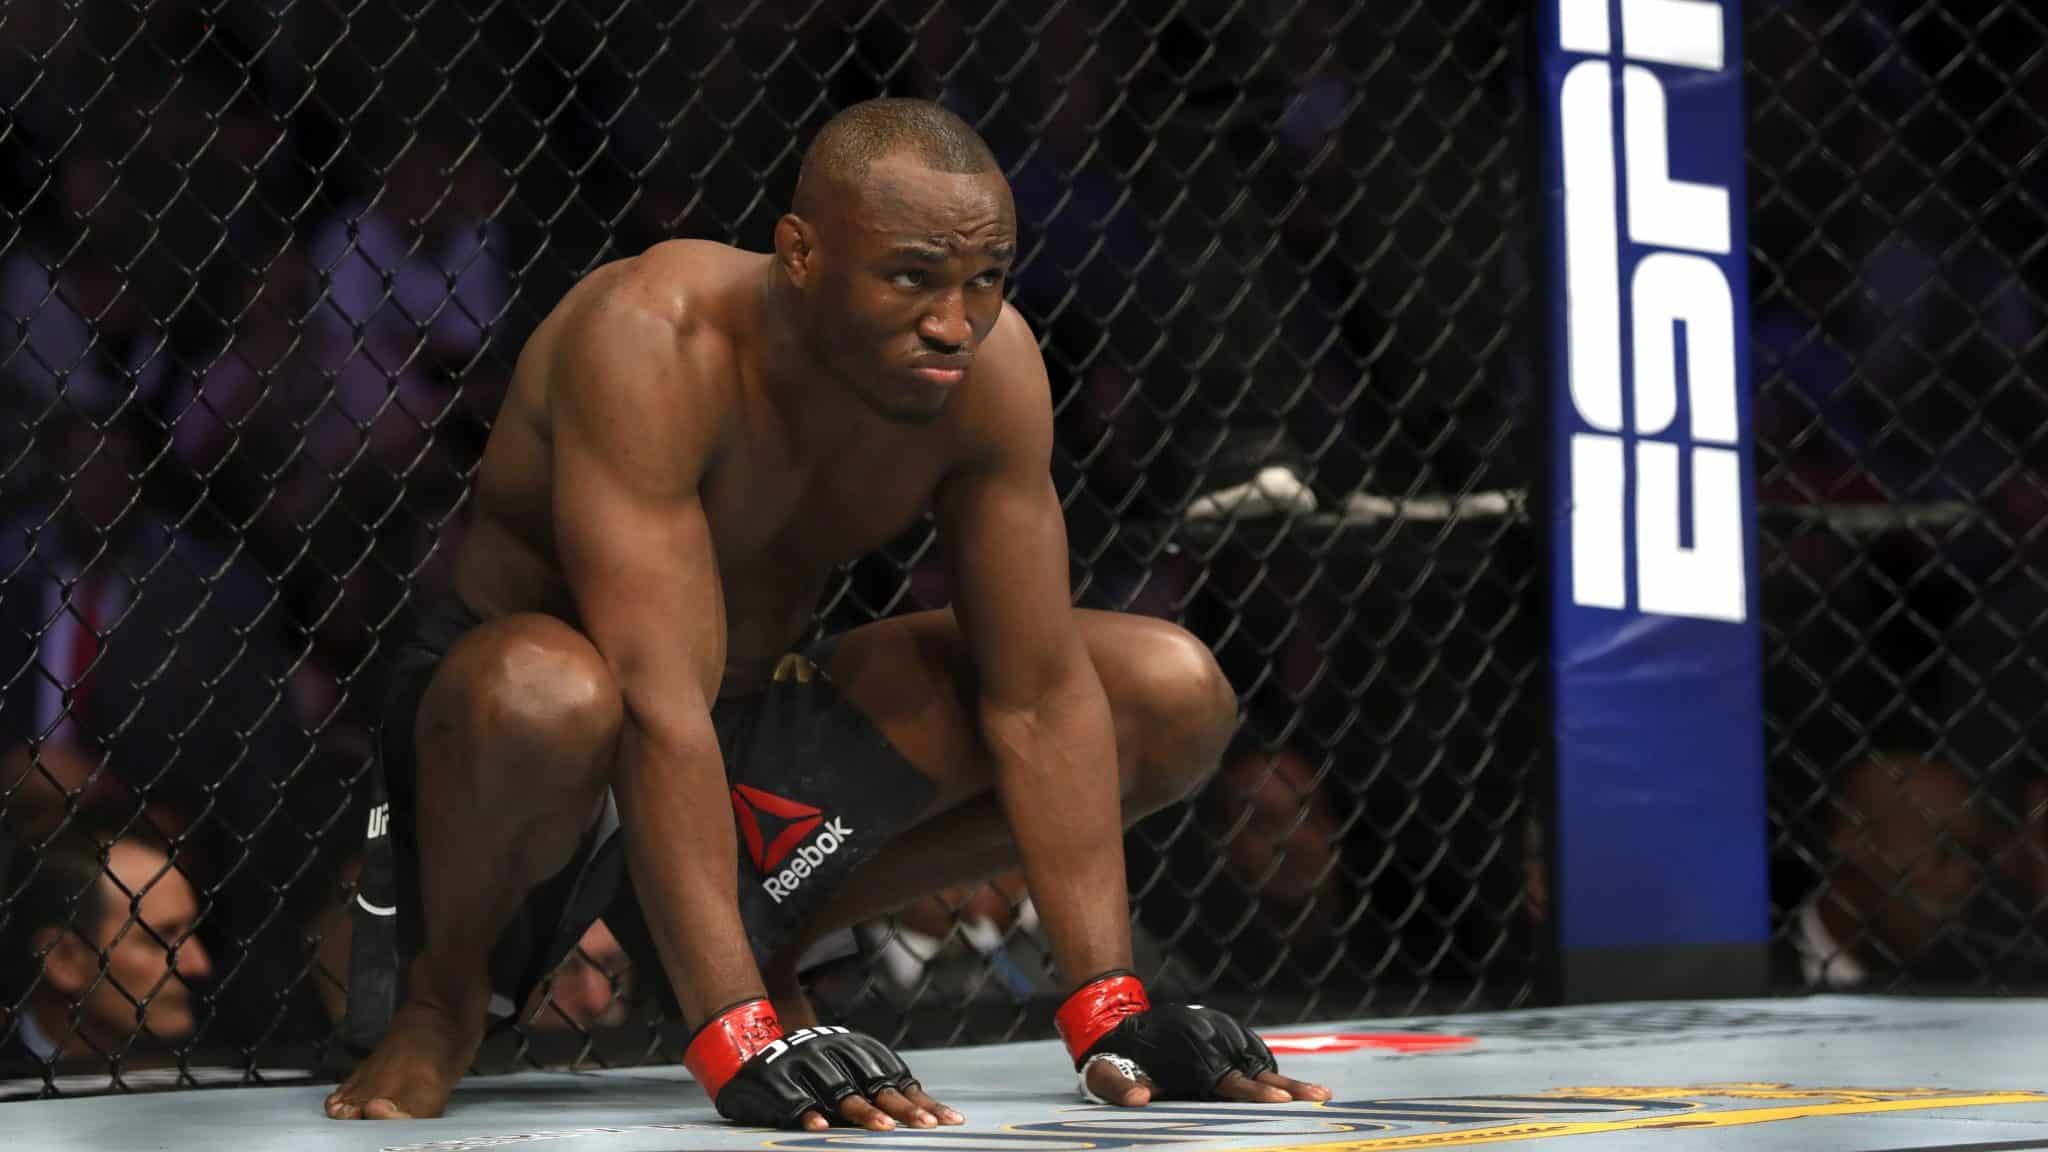 LAS VEGAS, NEVADA - DECEMBER 14: UFC welterweight champion Kamaru Usman prepares for his title defense against Colby Covington during UFC 245 at T-Mobile Arena on December 14, 2019 in Las Vegas, Nevada. Usman retained his title with a fifth-round TKO.